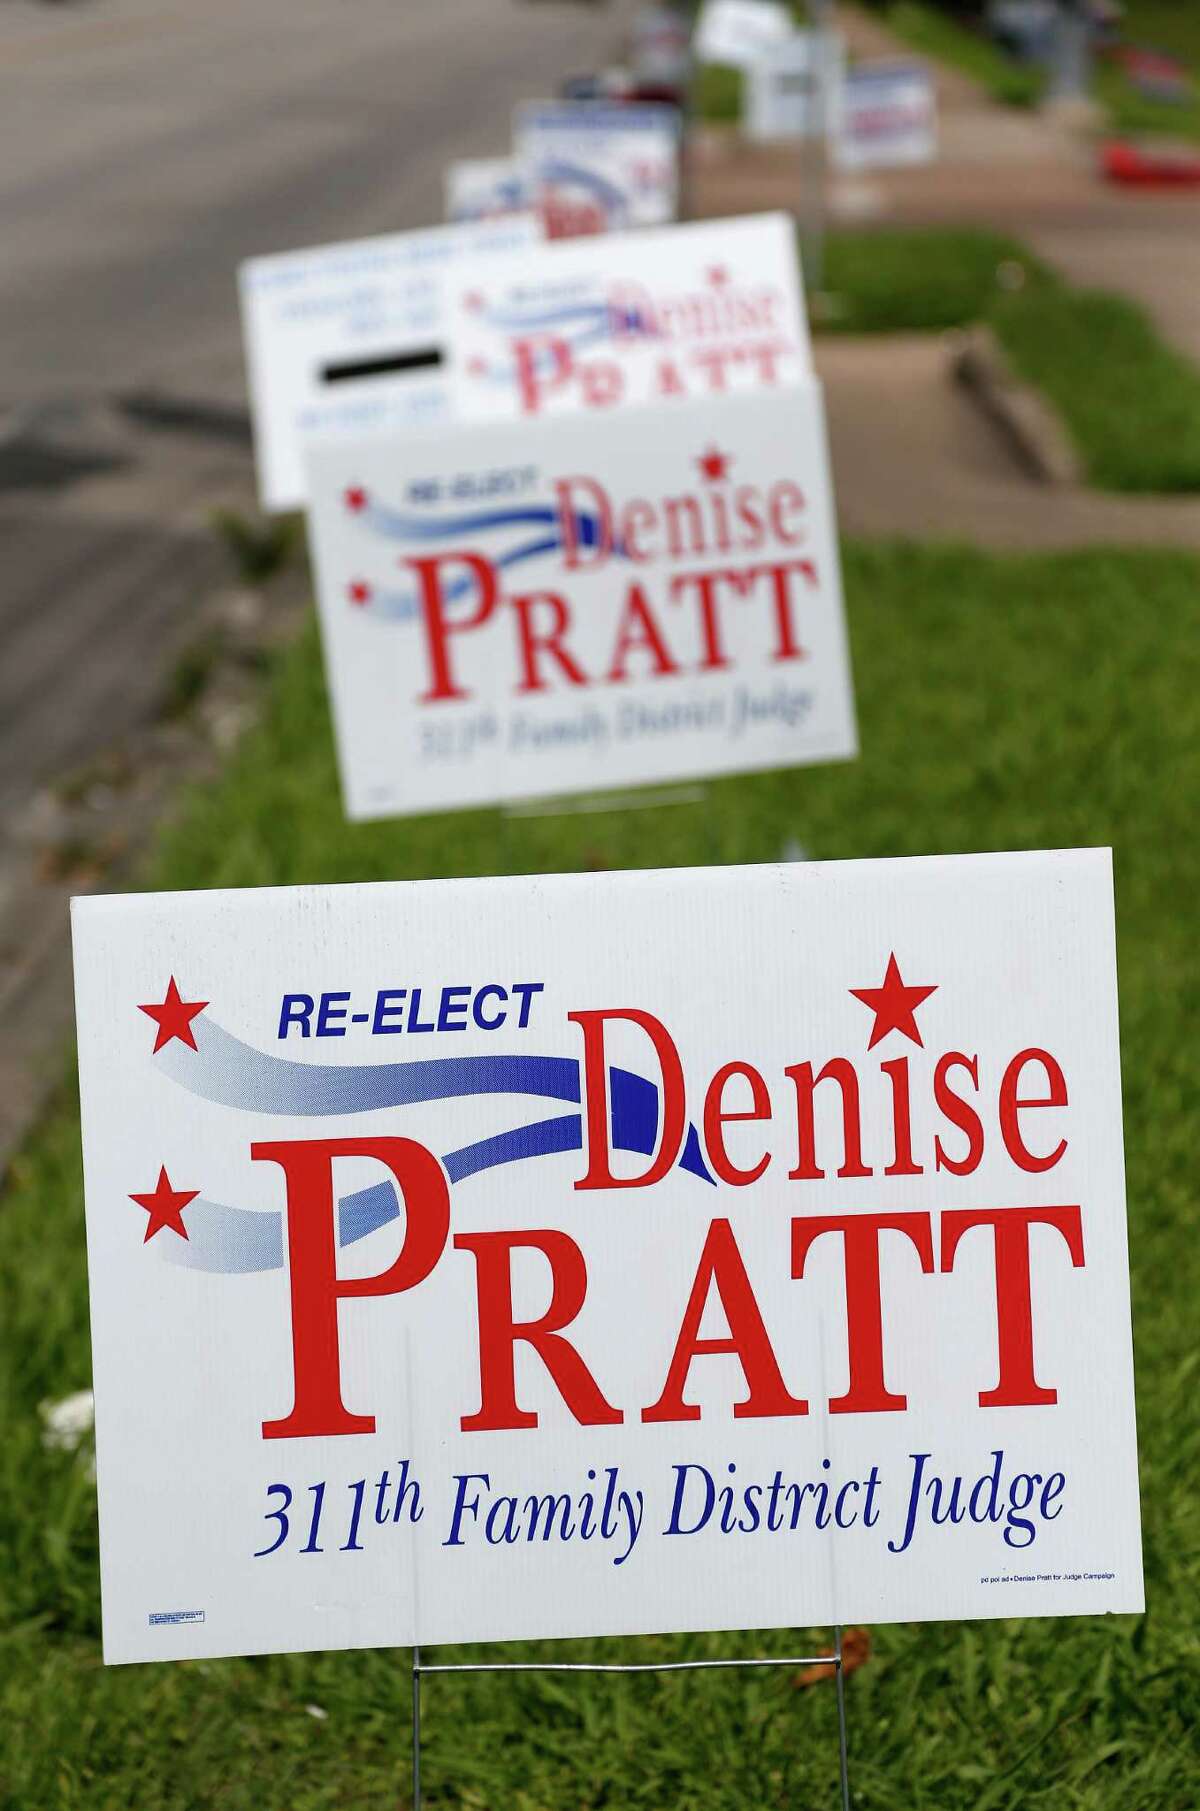 Ex-Judge Denise Pratt's campaign signs up at the Metropolitan Multi-Services Center, 1475 W Gray early voting location, Thursday, May 22, 2014, in Houston.